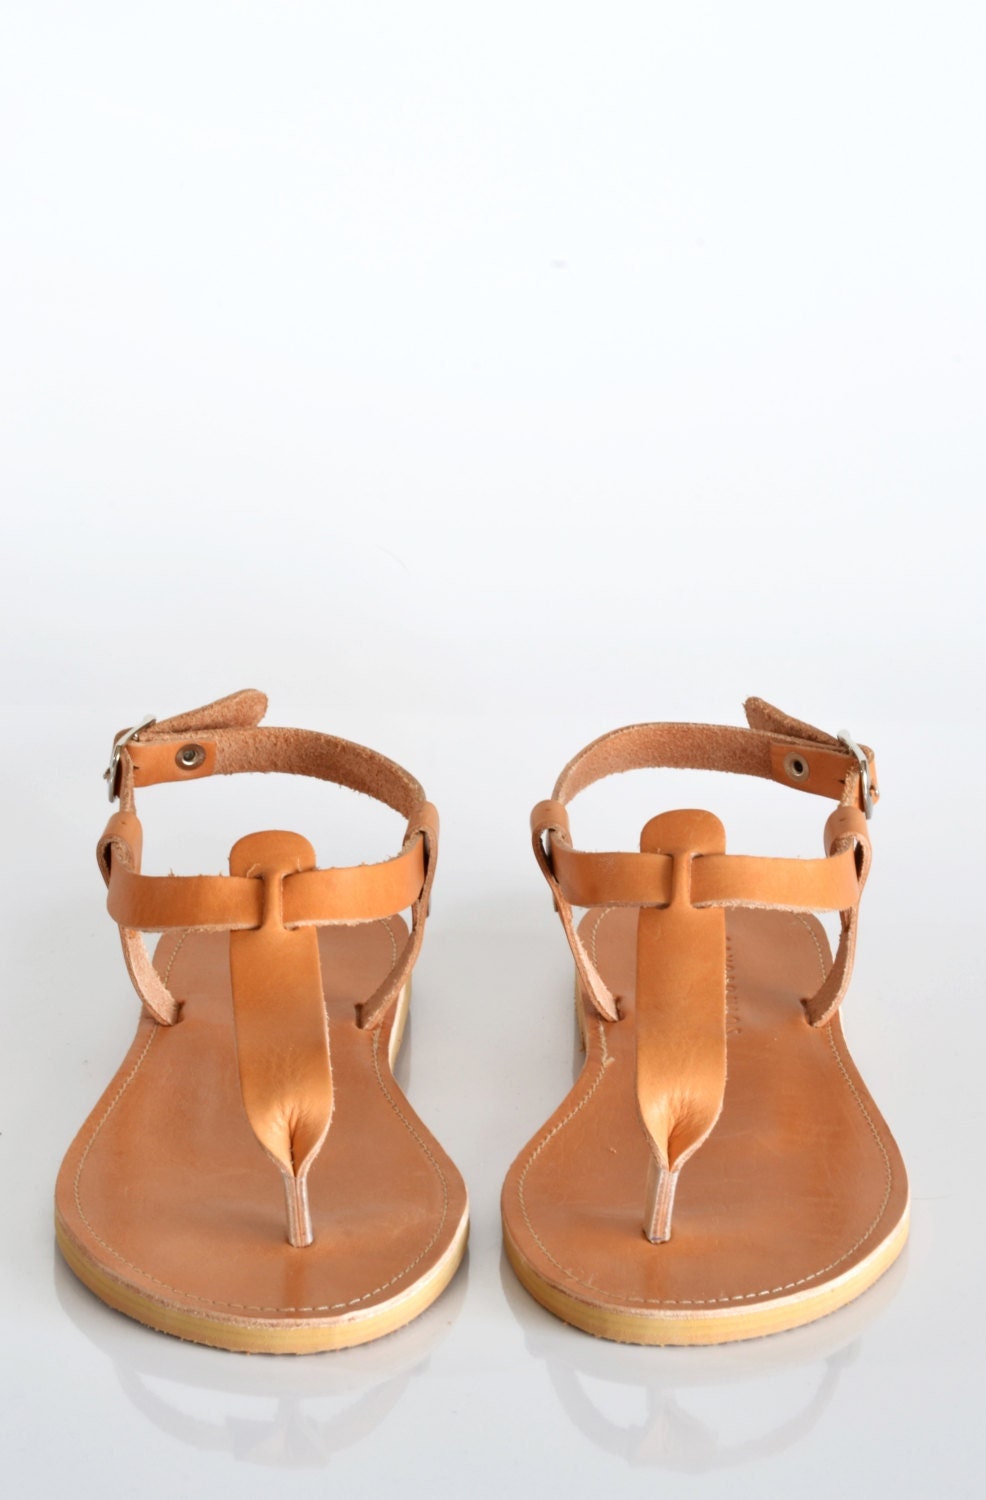 T-strap Leather Sandals Black Leather Sandals Handmade, 40% OFF